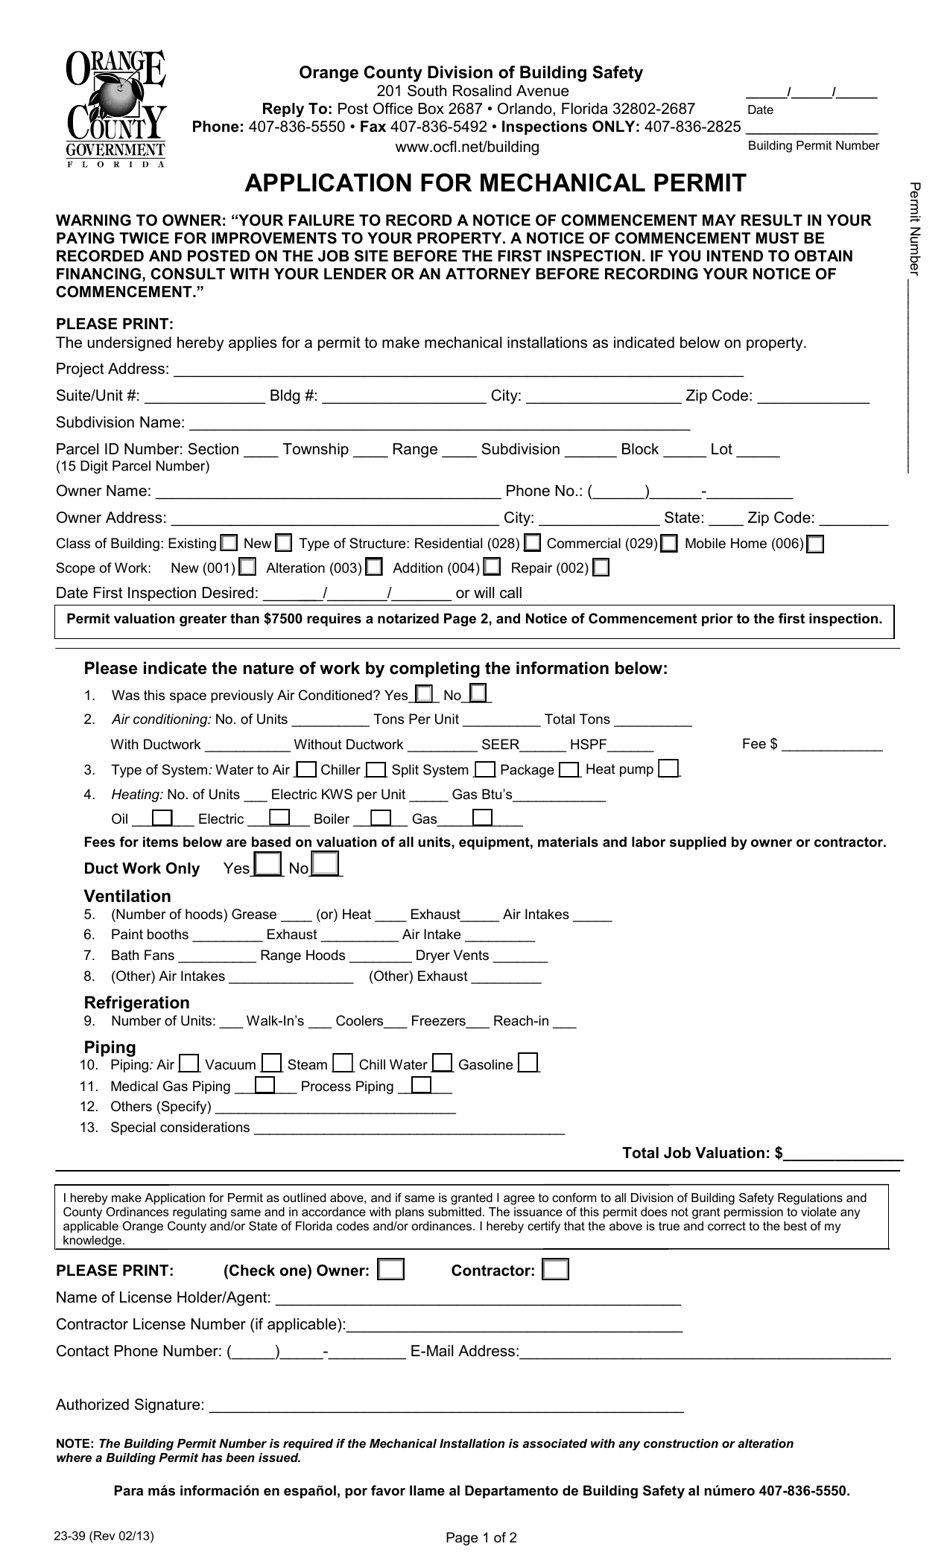 Form 23-39 Application for Mechanical Permit - Orange County, Florida, Page 1